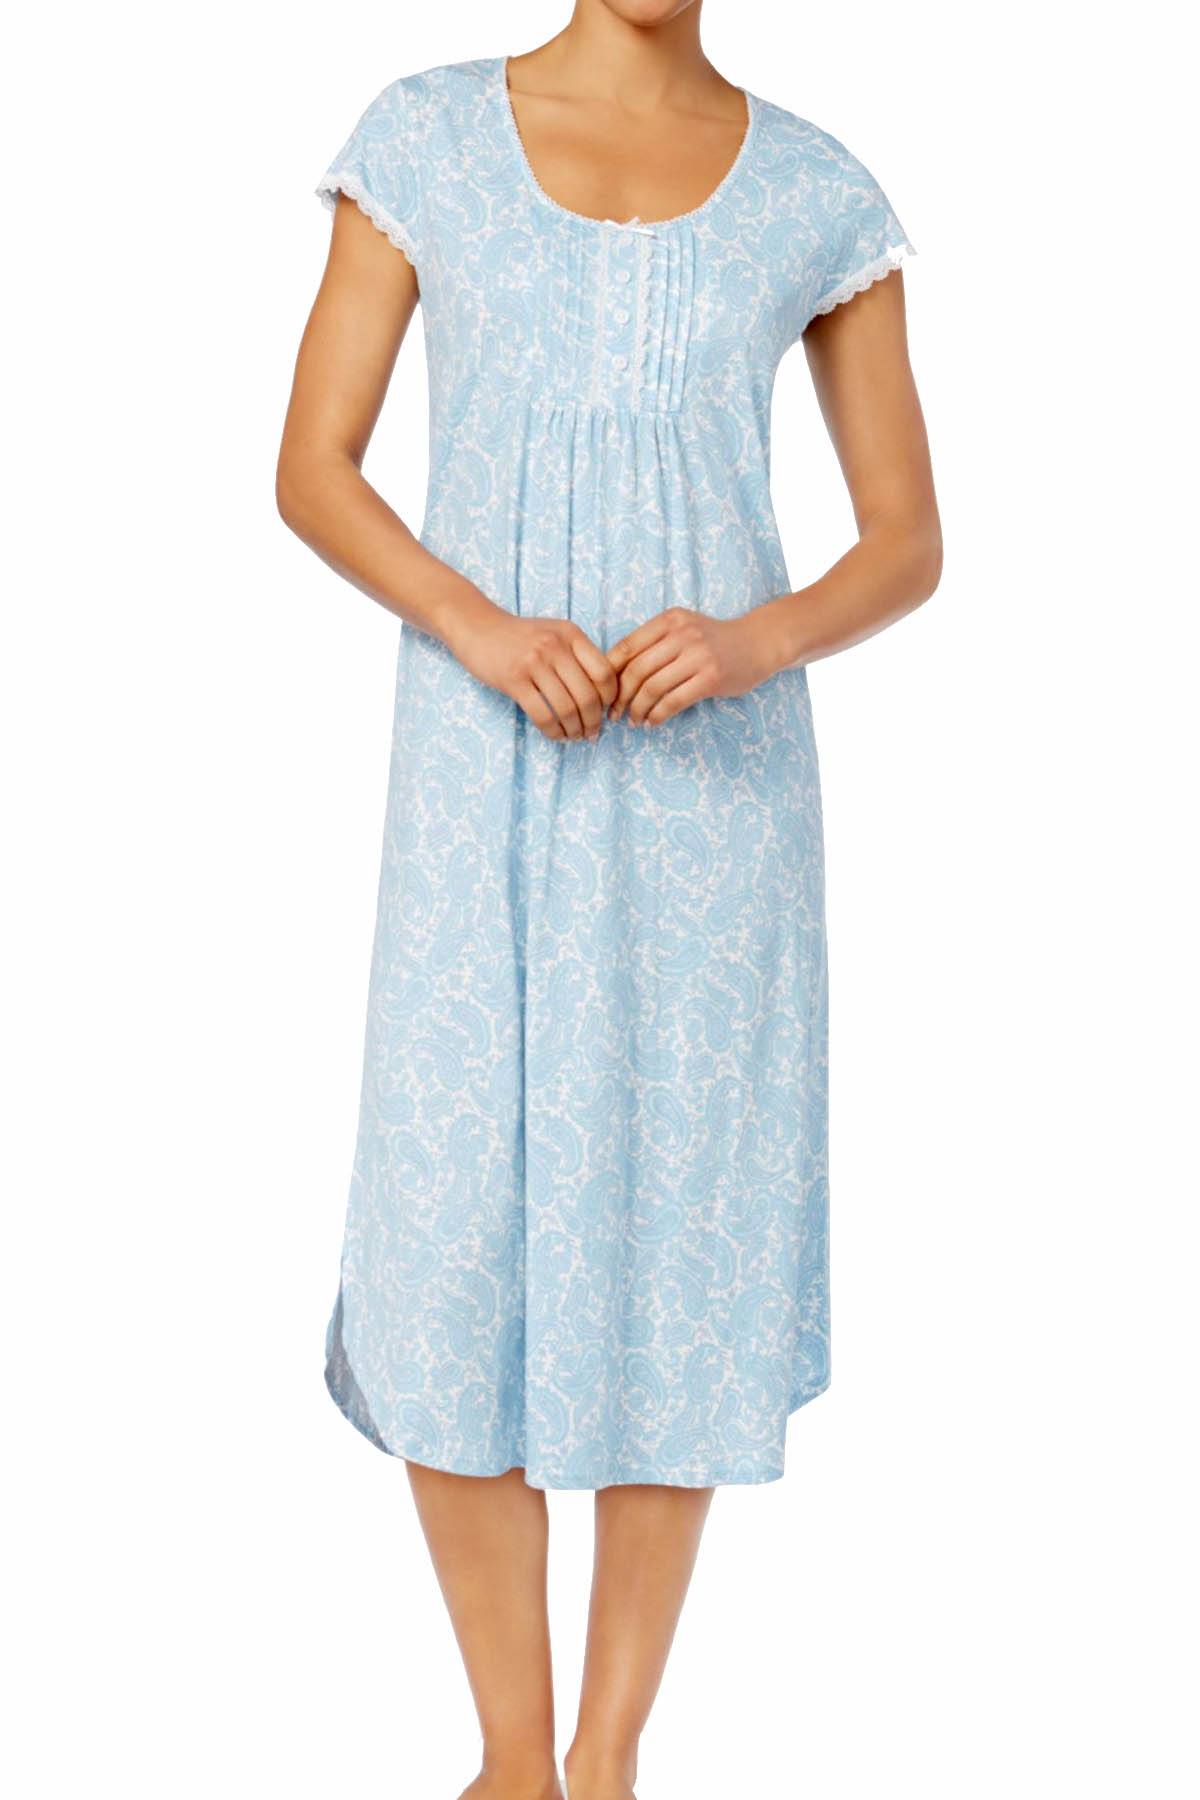 Miss Elaine Blue/Lavender Paisley-Print Tucked-Front Knit Nightgown